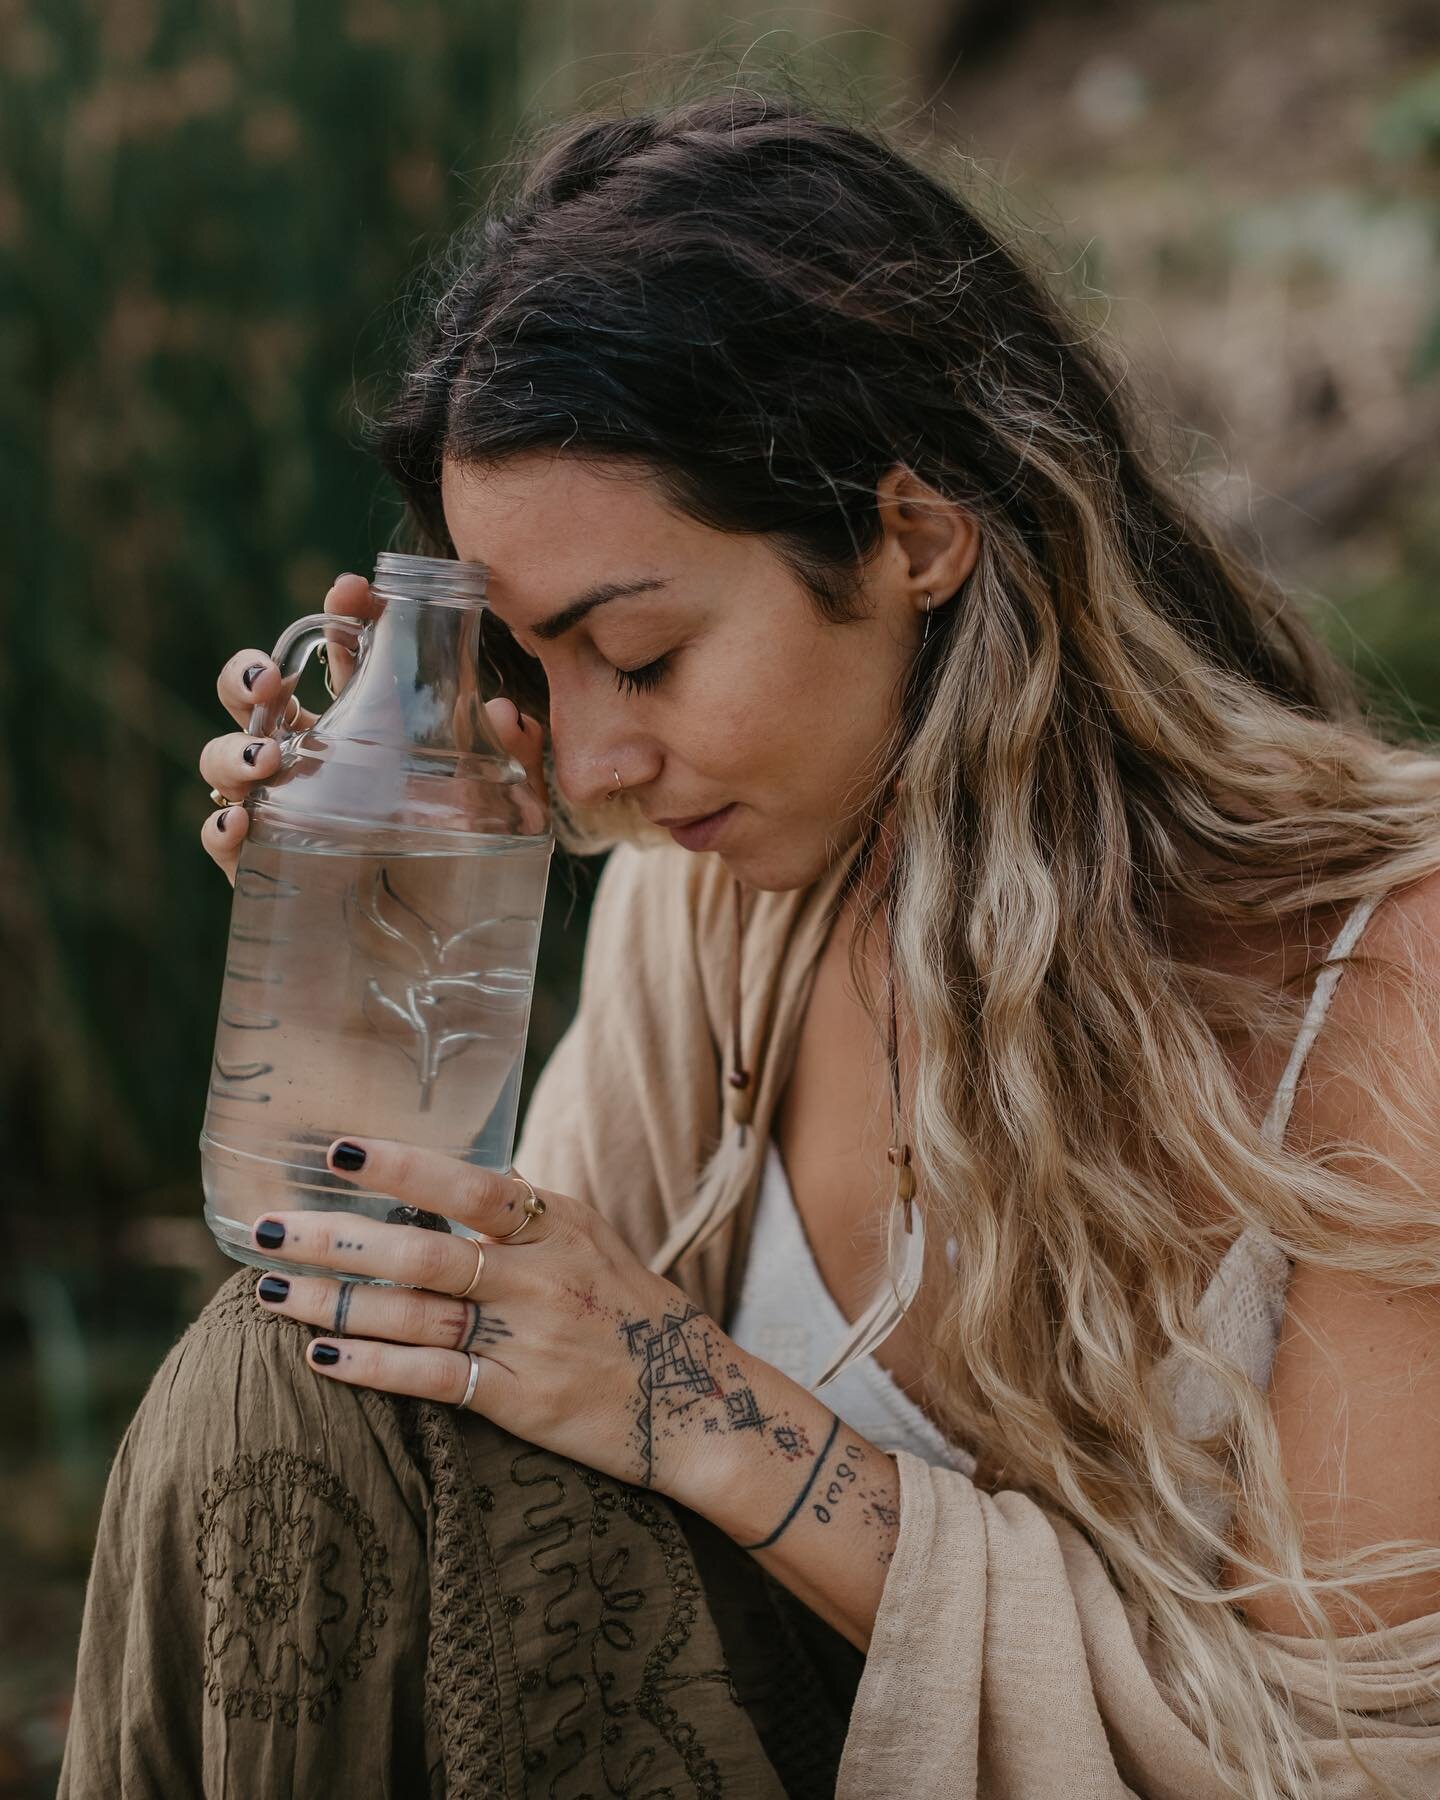 &bull; Day 3 - of our cleanse &bull; 

Dedicated to clarity, awereness - water. 

𝗧𝗵𝗶𝘀 𝘄𝗼𝗿𝗸 𝗶𝘀 𝗳𝗼𝗿 𝘁𝗵𝗼𝘀𝗲 𝘄𝗵𝗼 𝗮𝗿𝗲 𝗯𝗿𝗮𝘃𝗲, passionate and curious beings who know they came to Earth to make a difference and are ready to take 